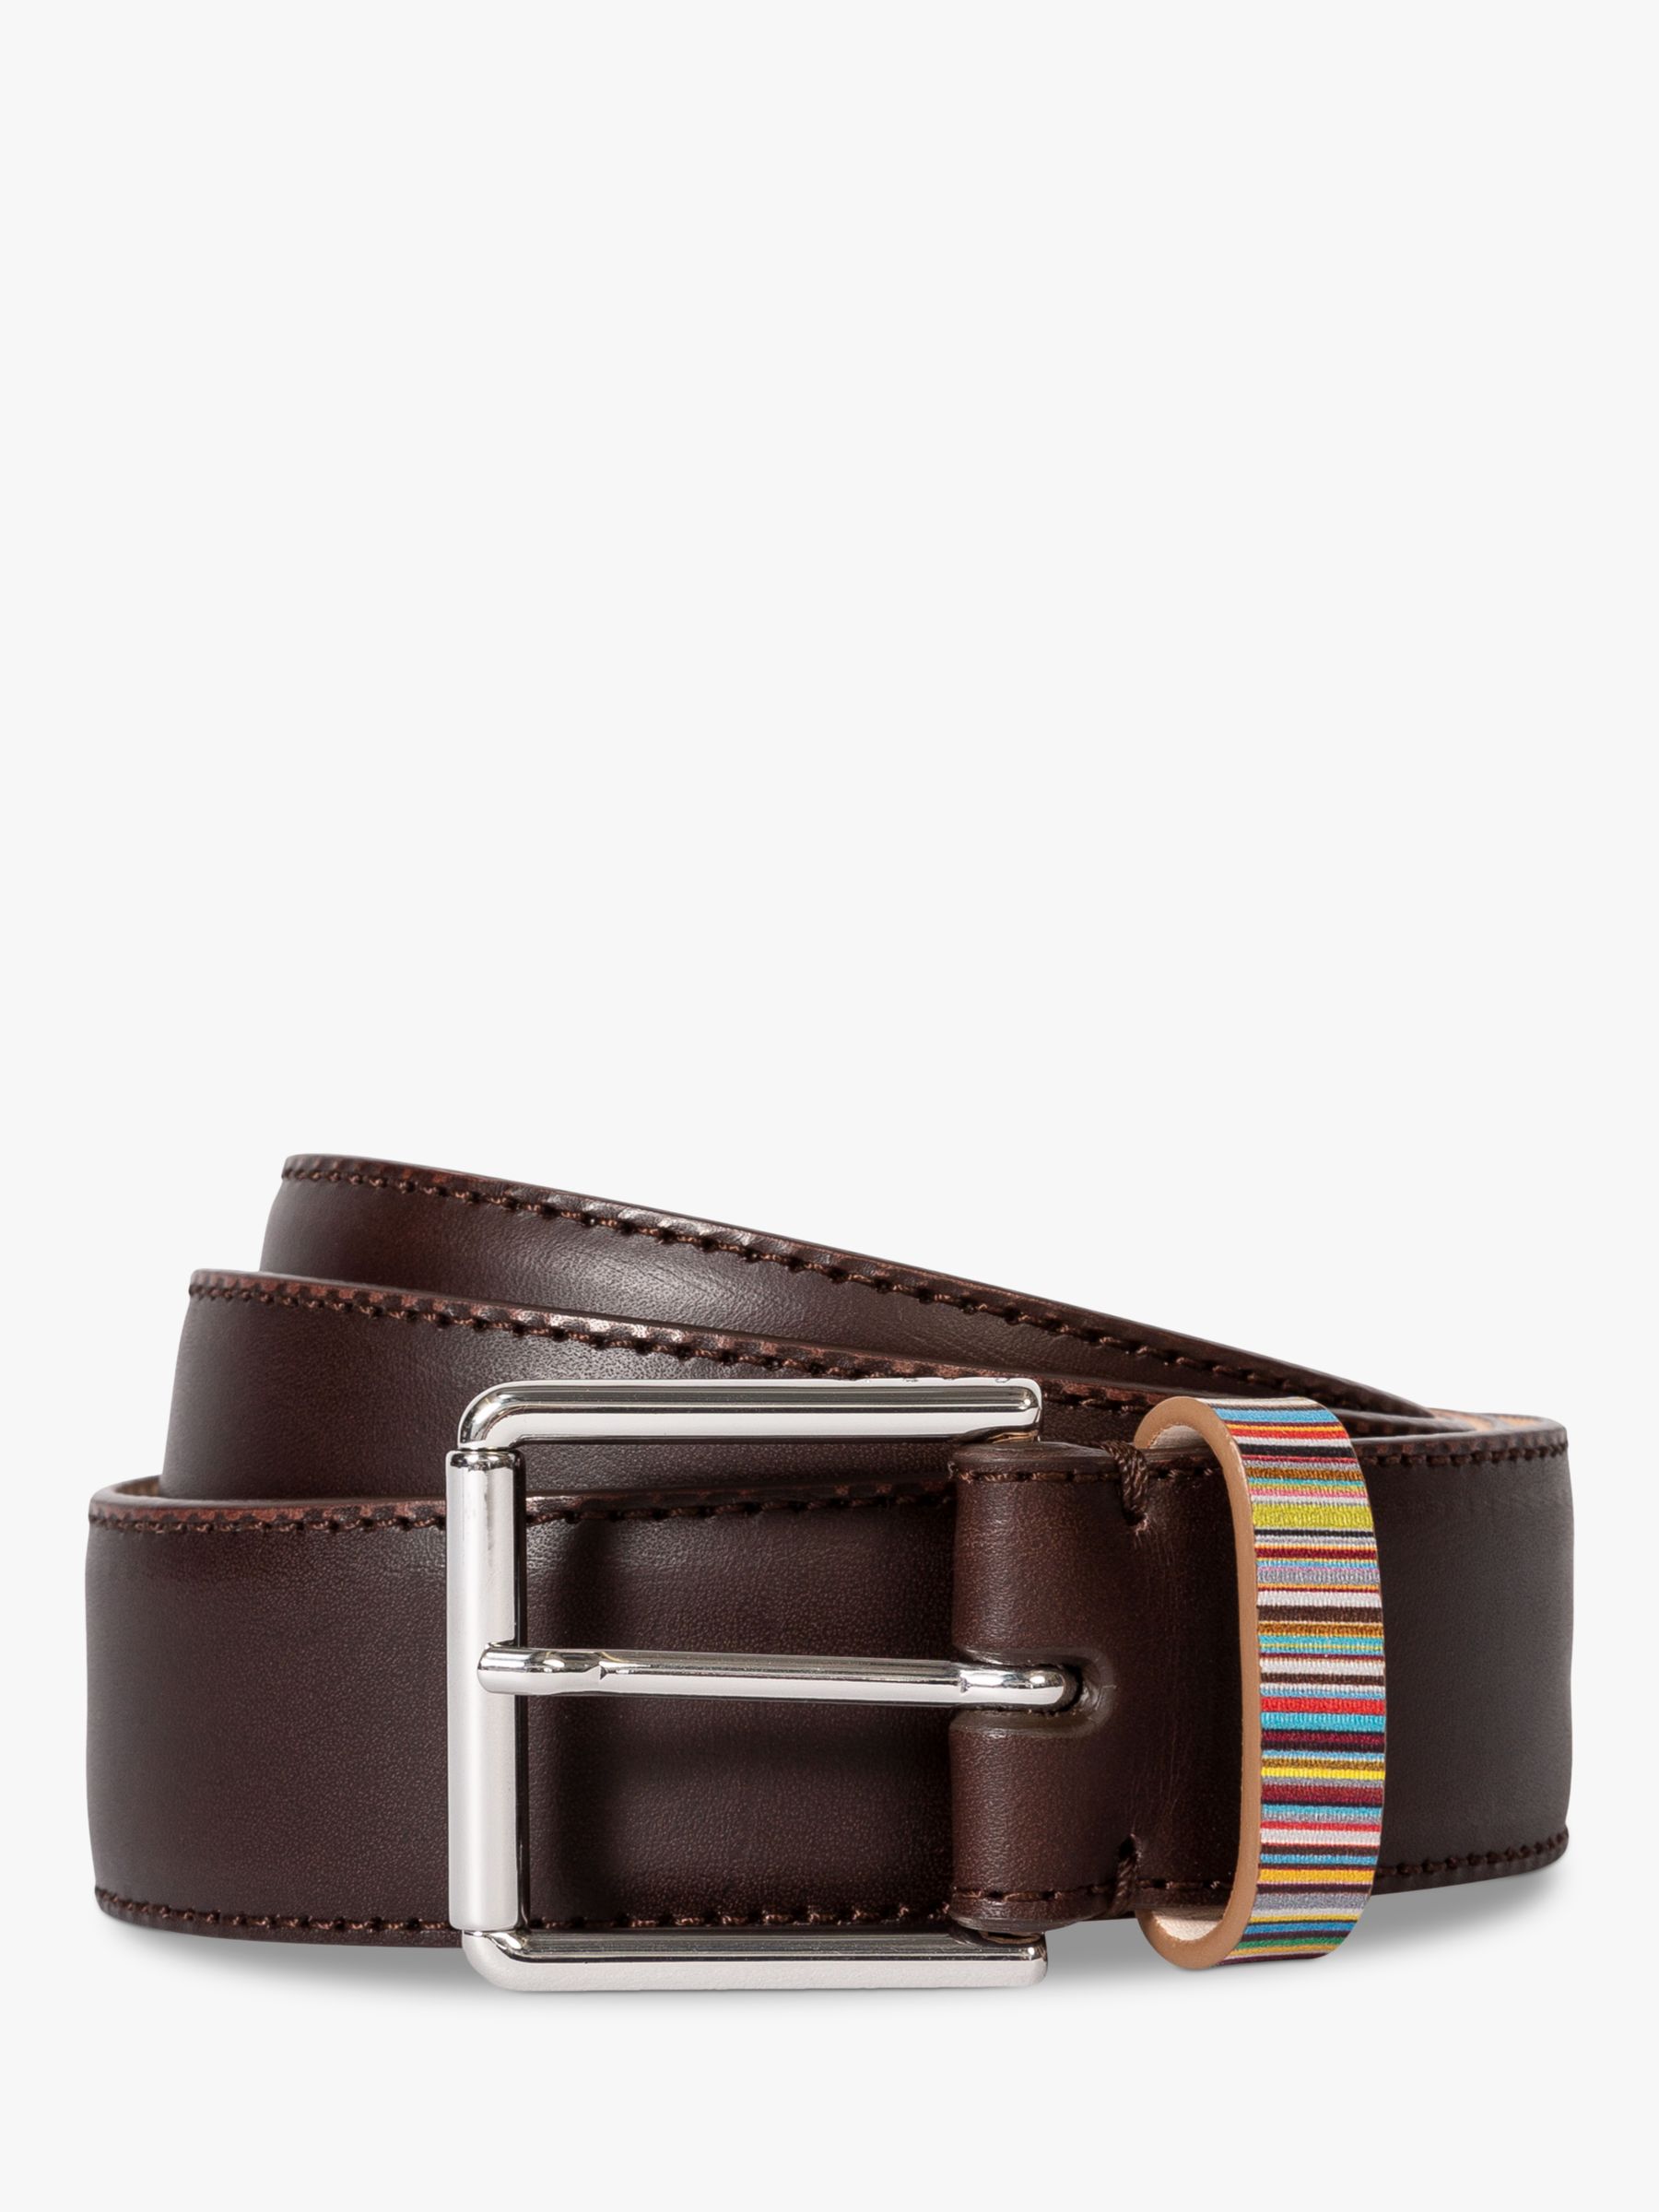 Paul Smith Multicoloured Stripe Leather Belt, Brown at John Lewis  Partners